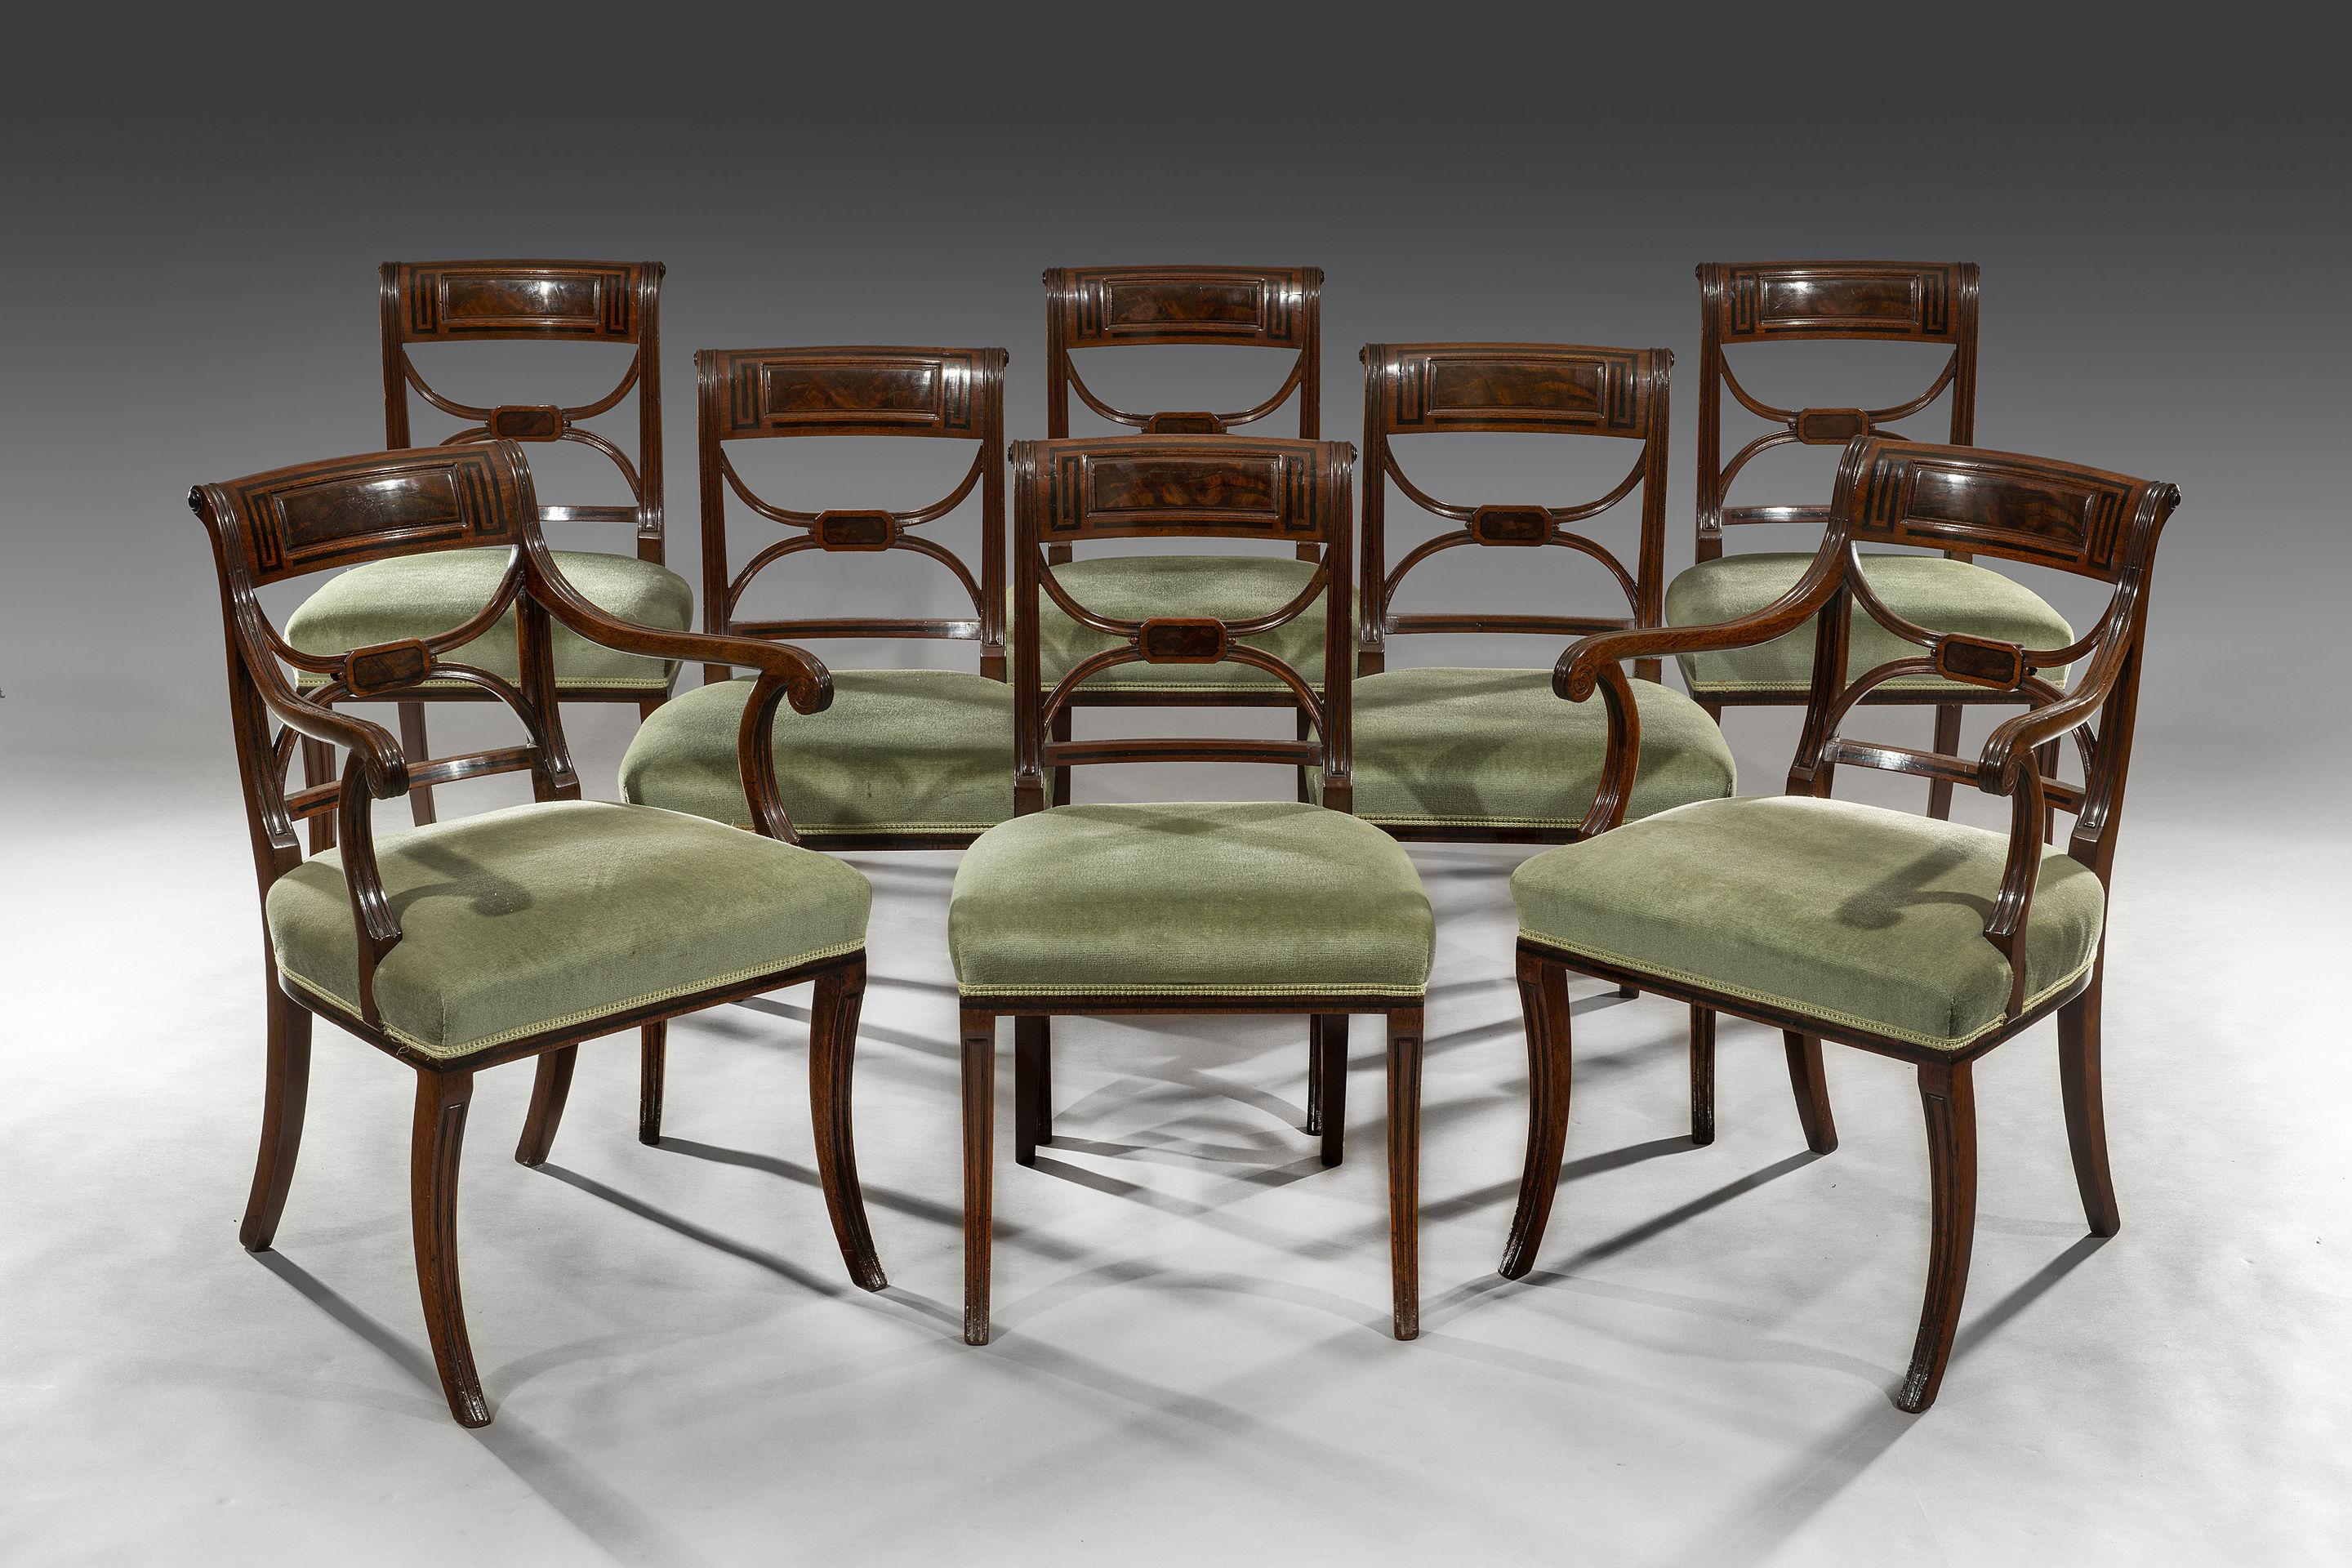 English Regency Period Set of Eight Mahogany and Ebony Inlaid Dining Chairs For Sale